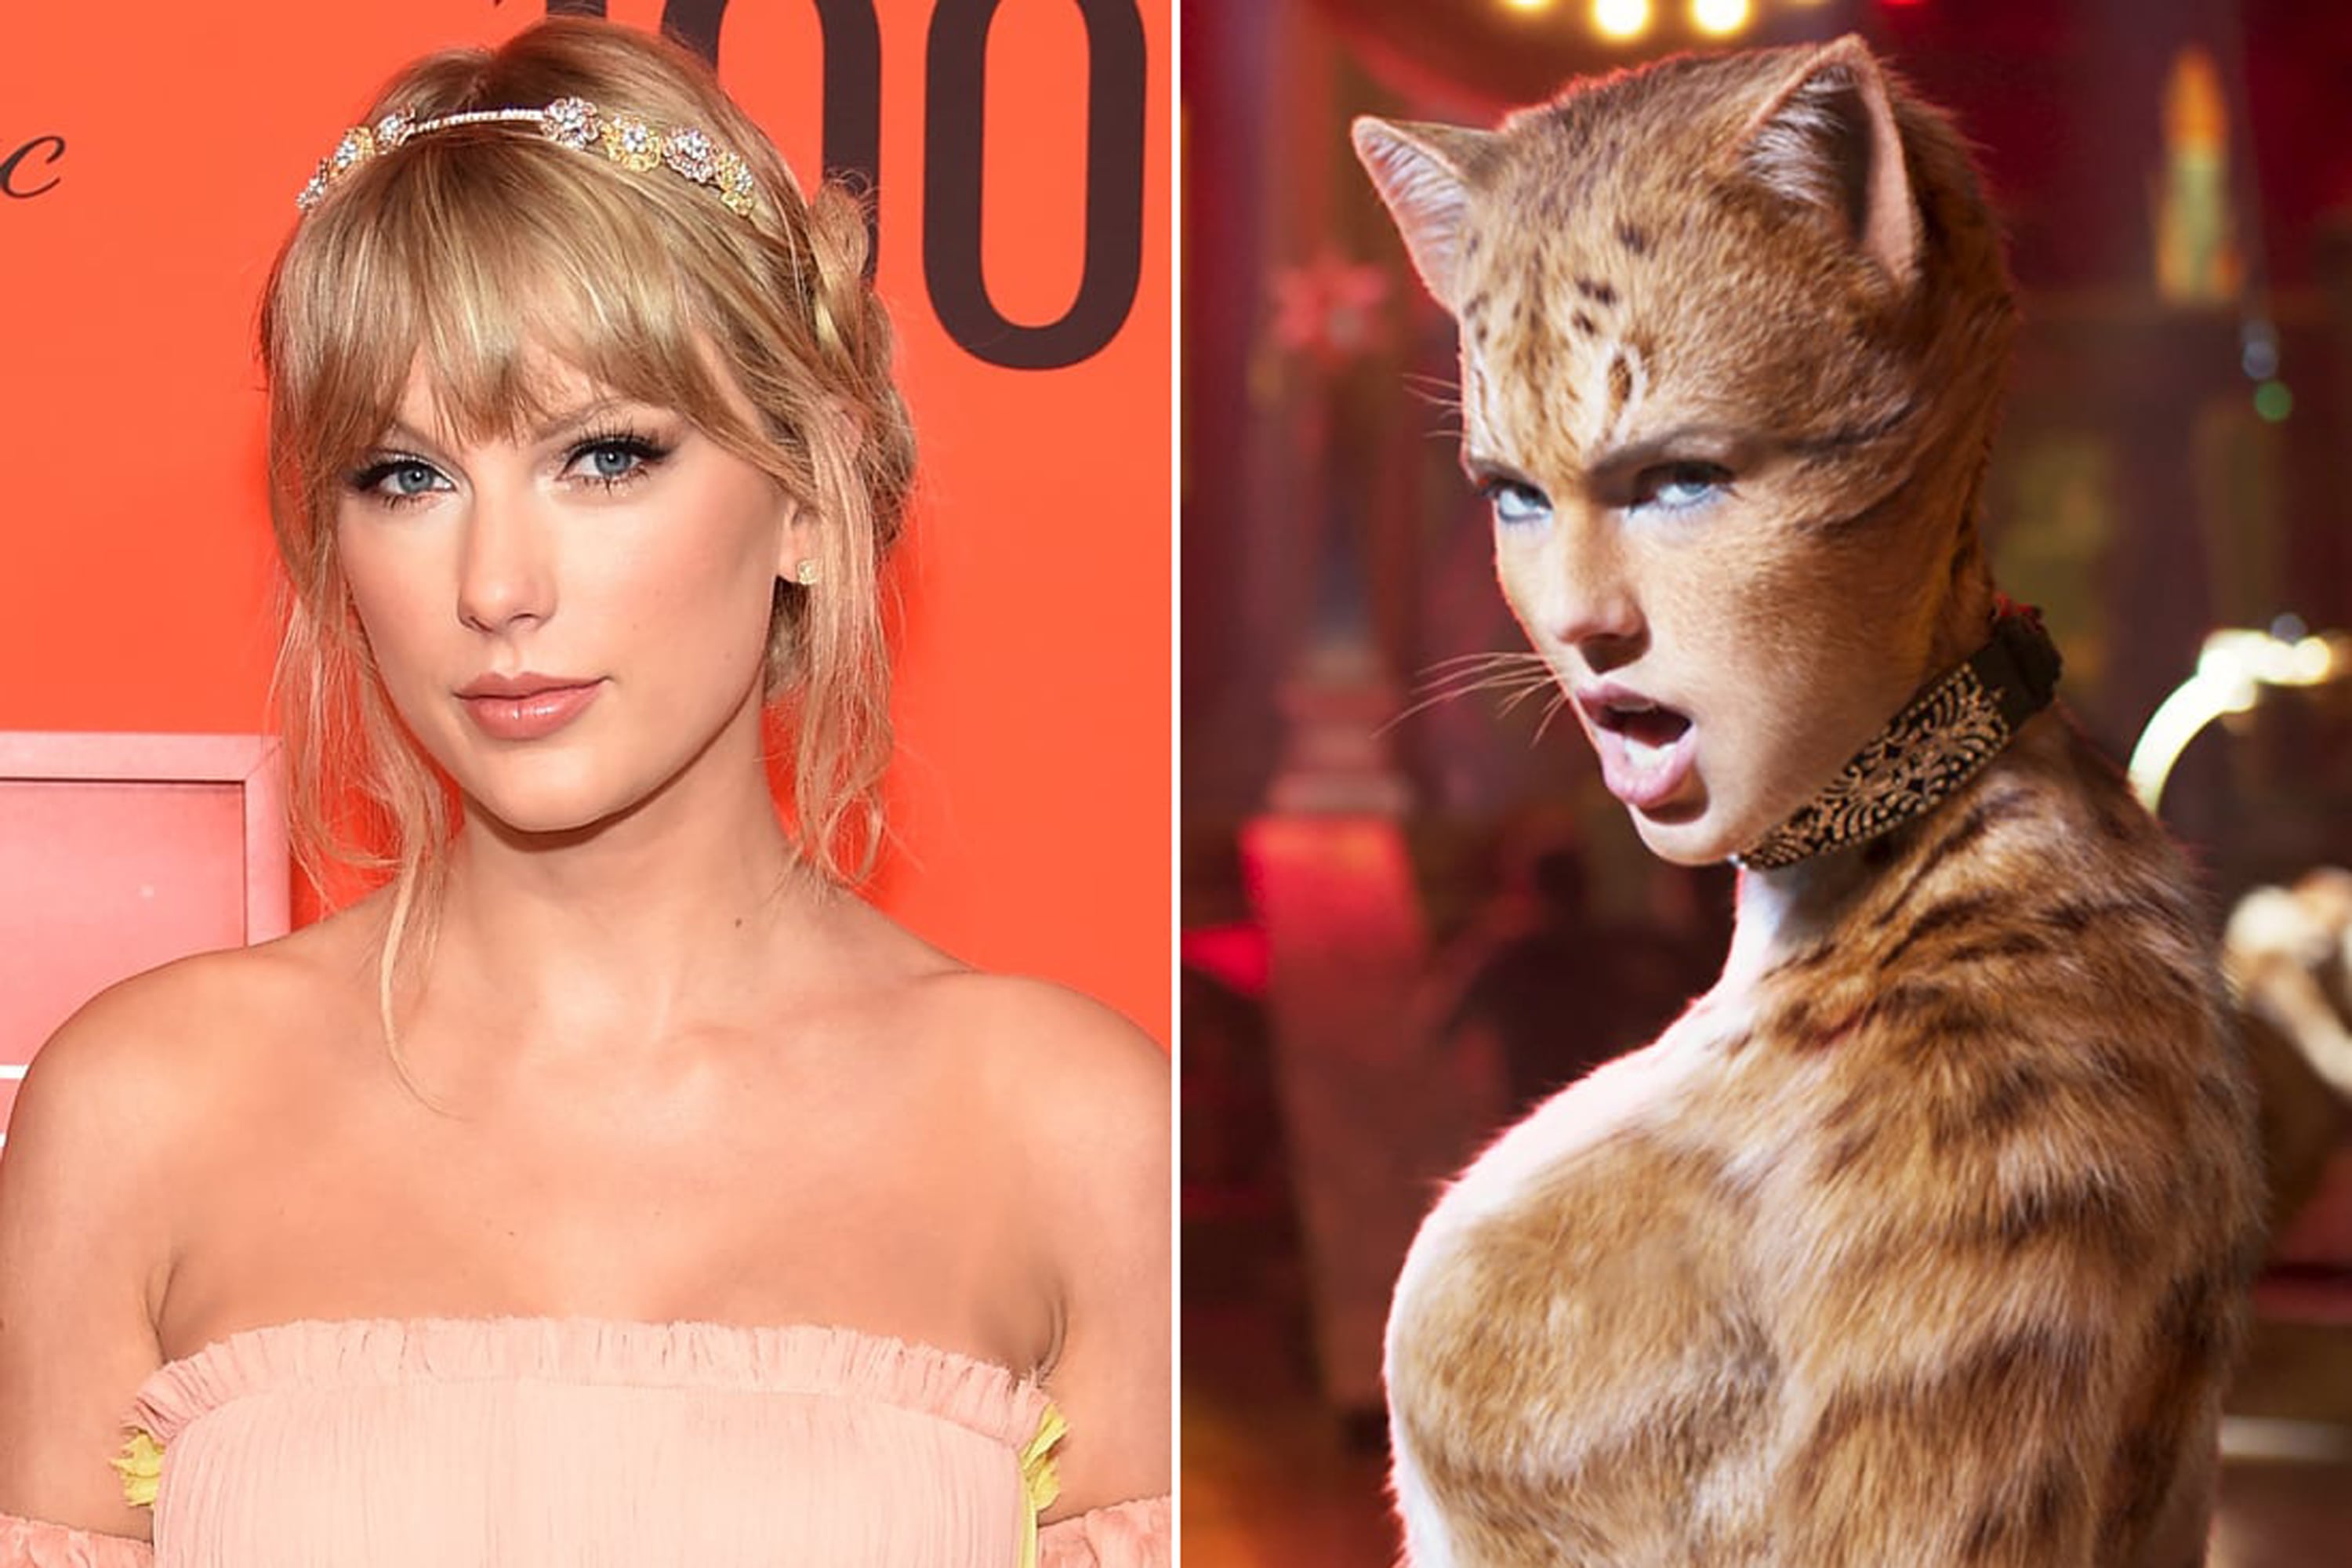 Cast of Cats If They Were Real-Life Cats